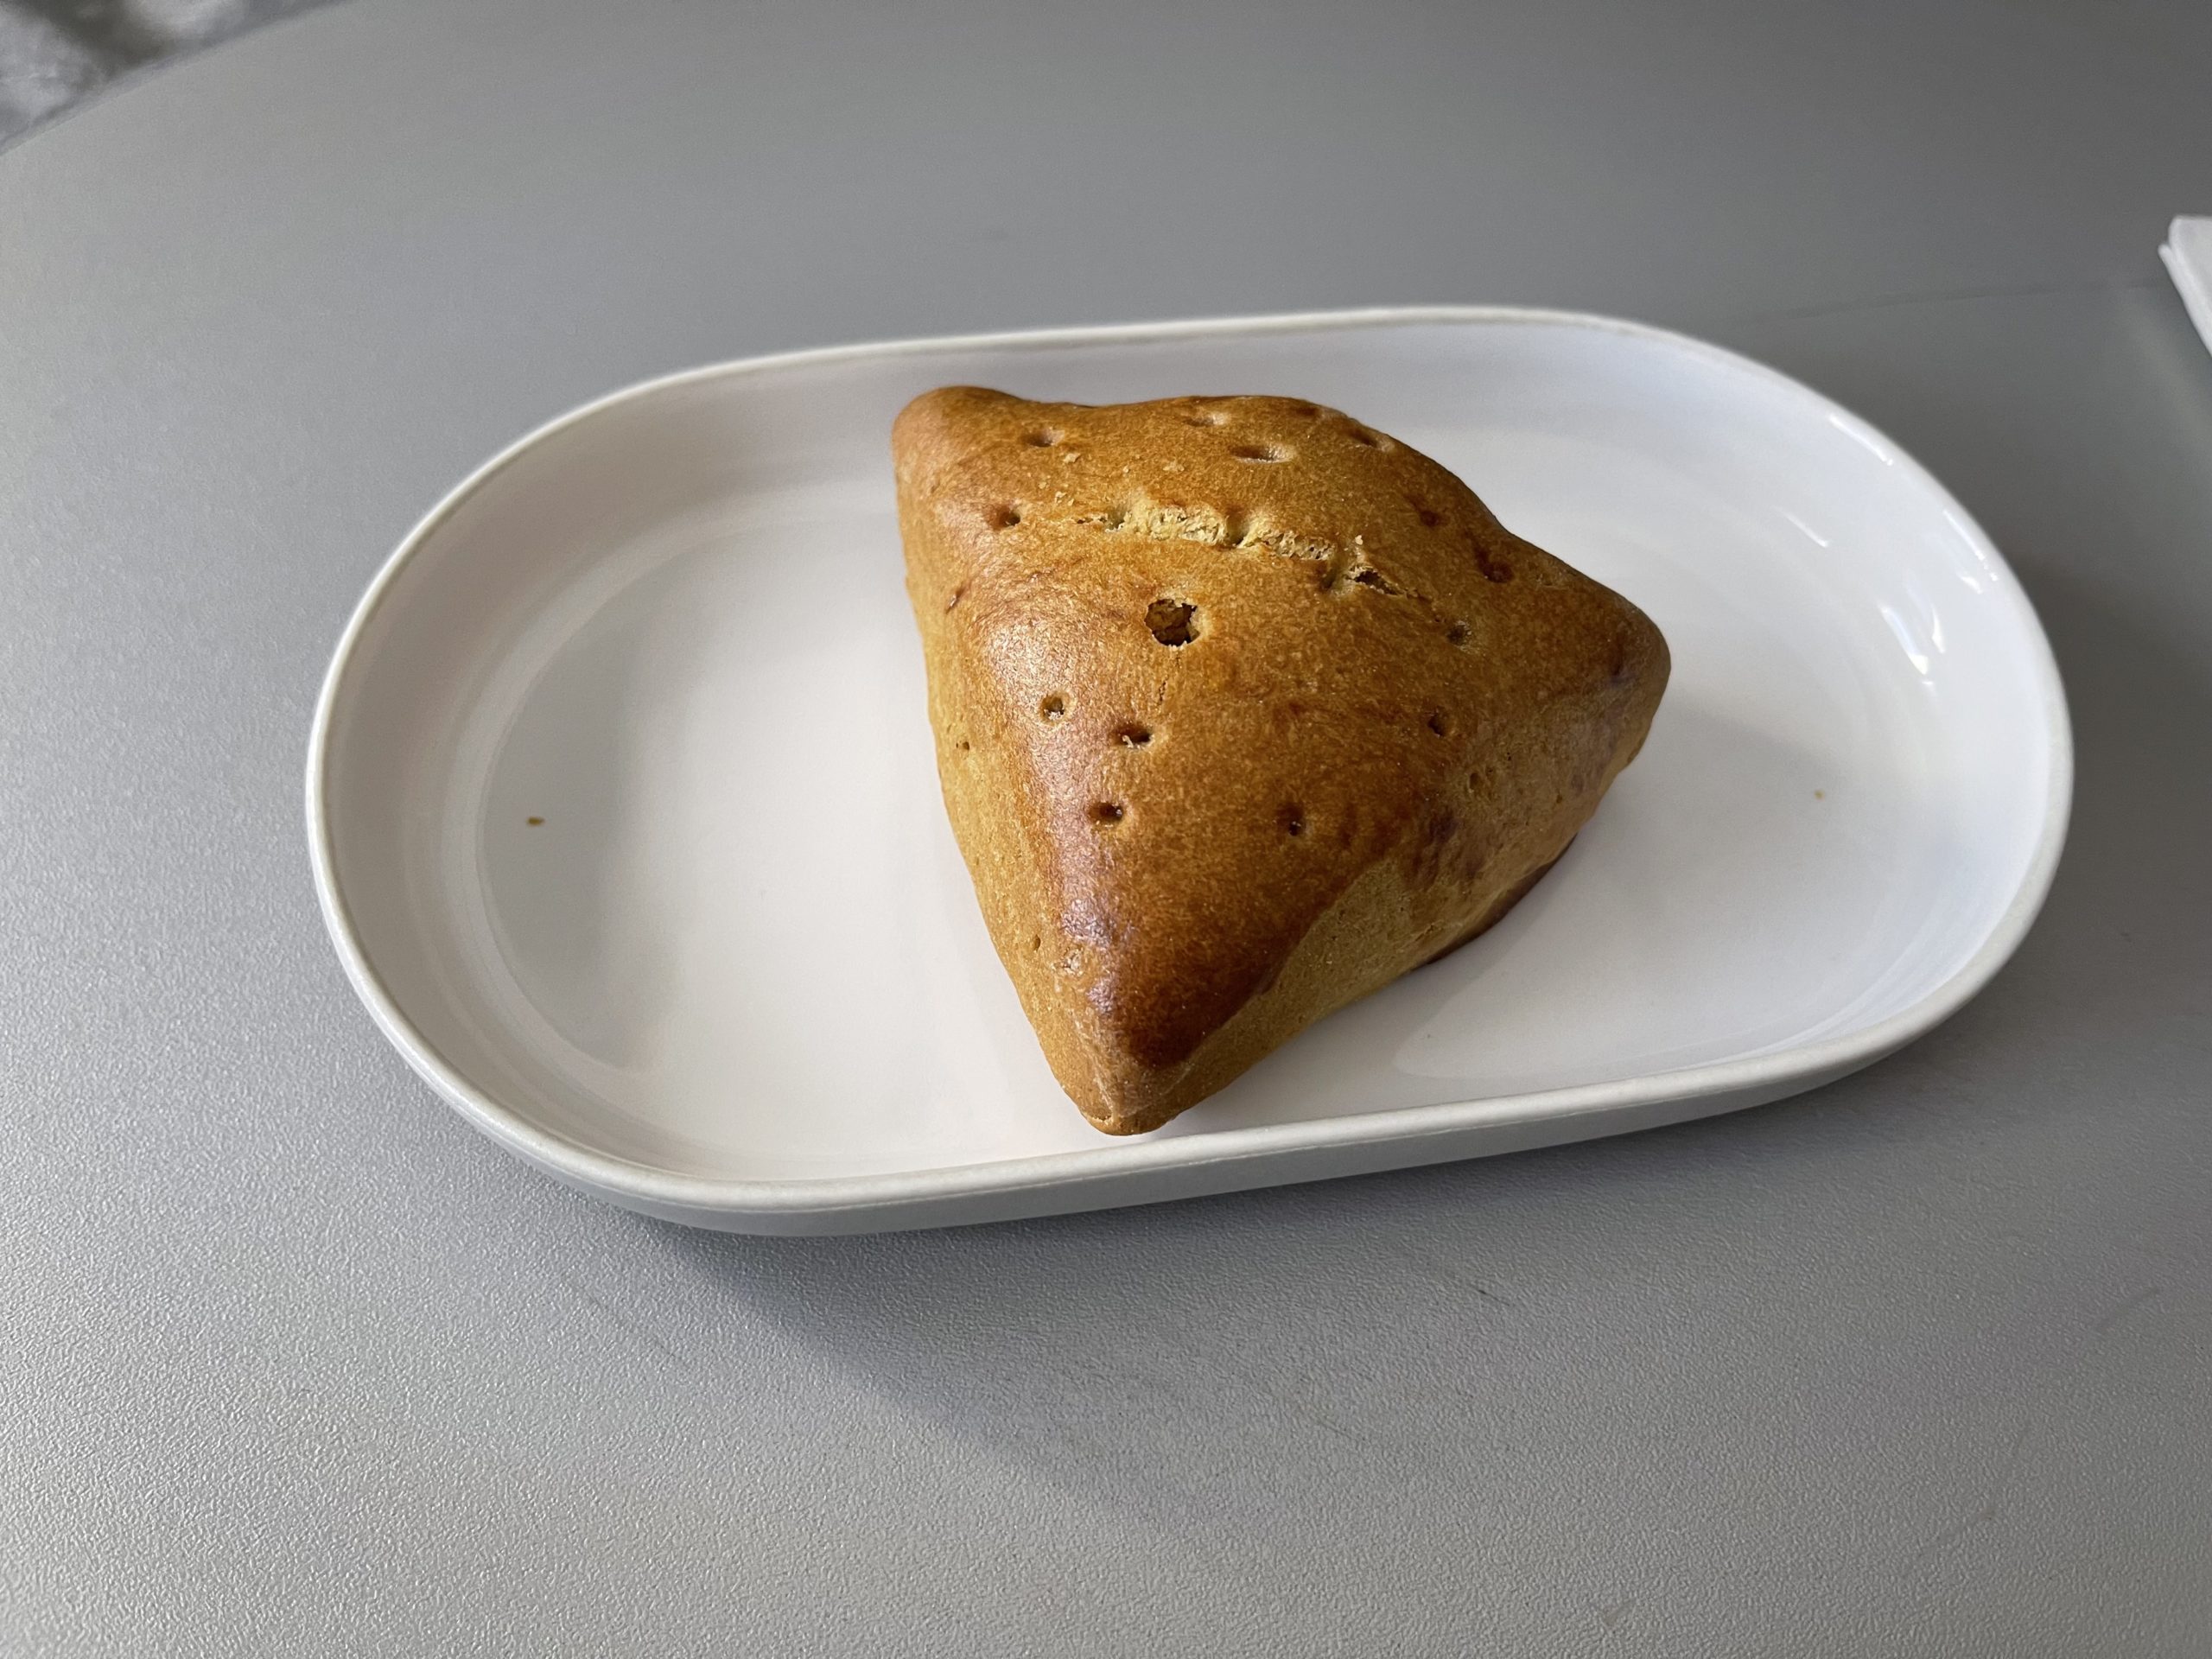 a triangular pastry on a plate